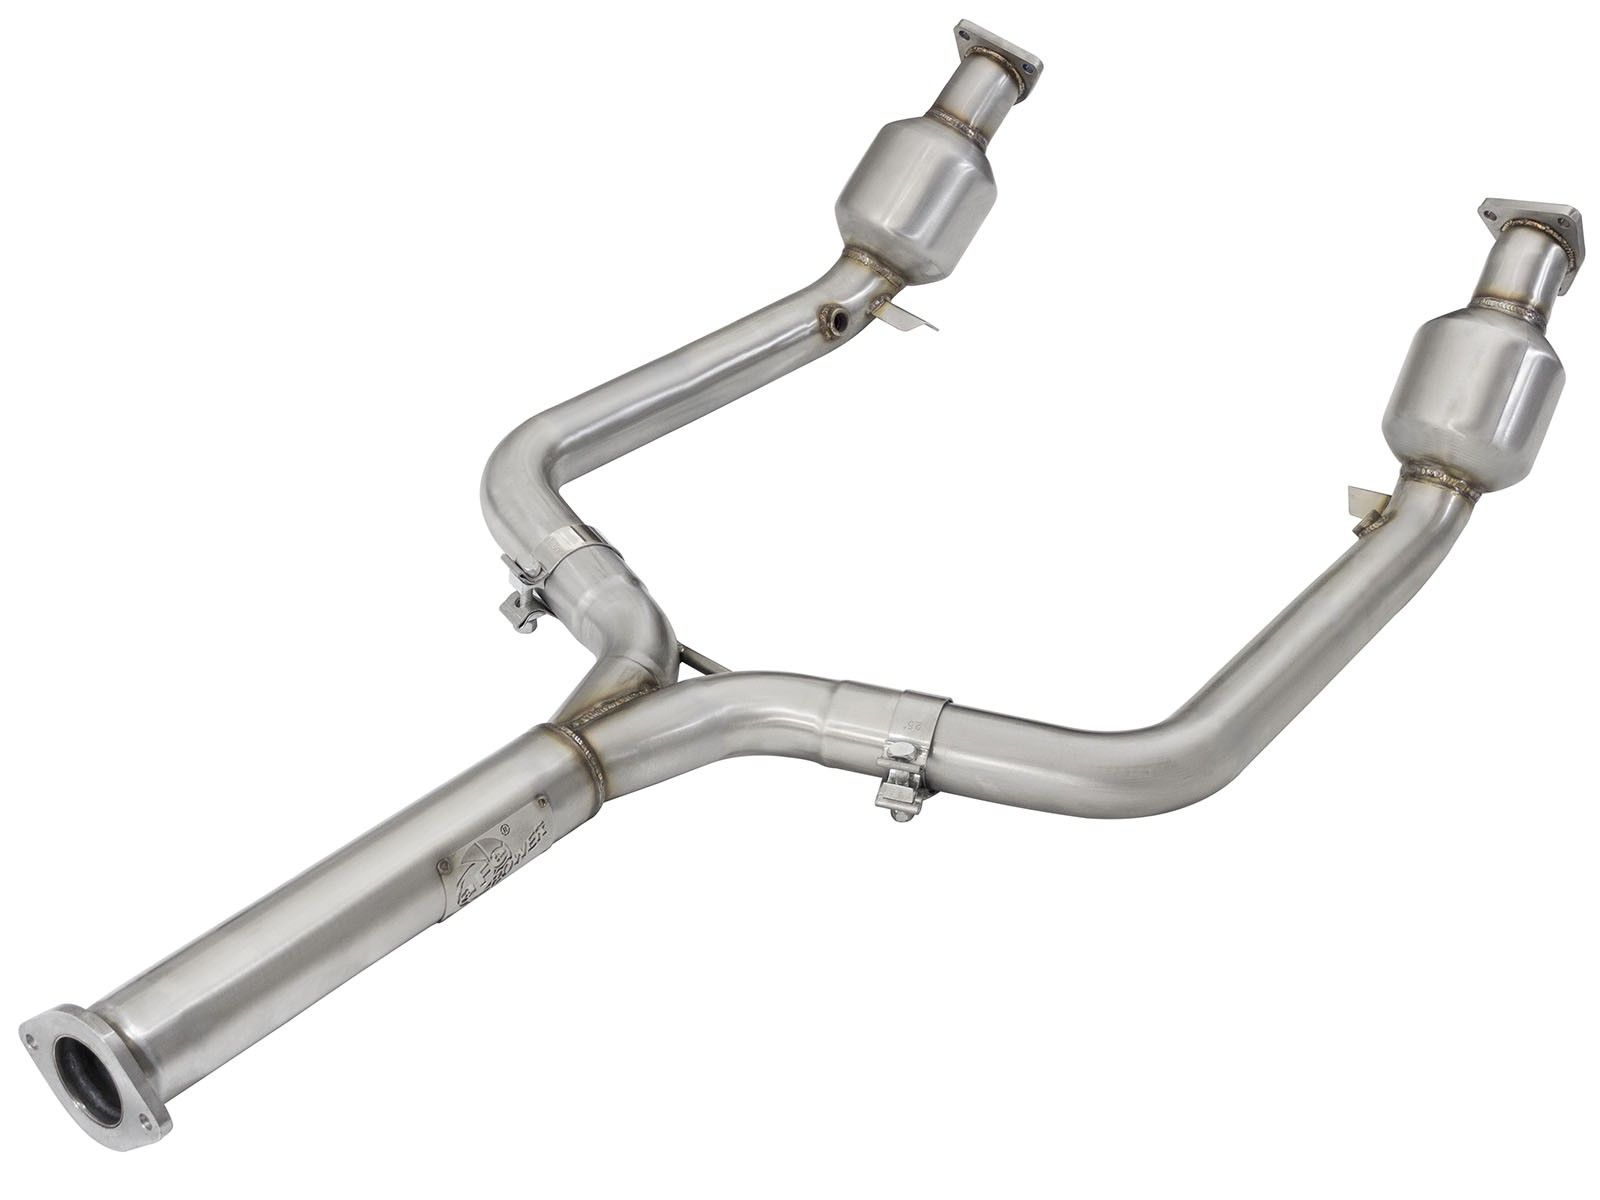 aFe Twisted Steel Y-Pipe / High Flow Cats HFC Combo, Street Series VQ35DE - Nissan 350Z / Infiniti G35